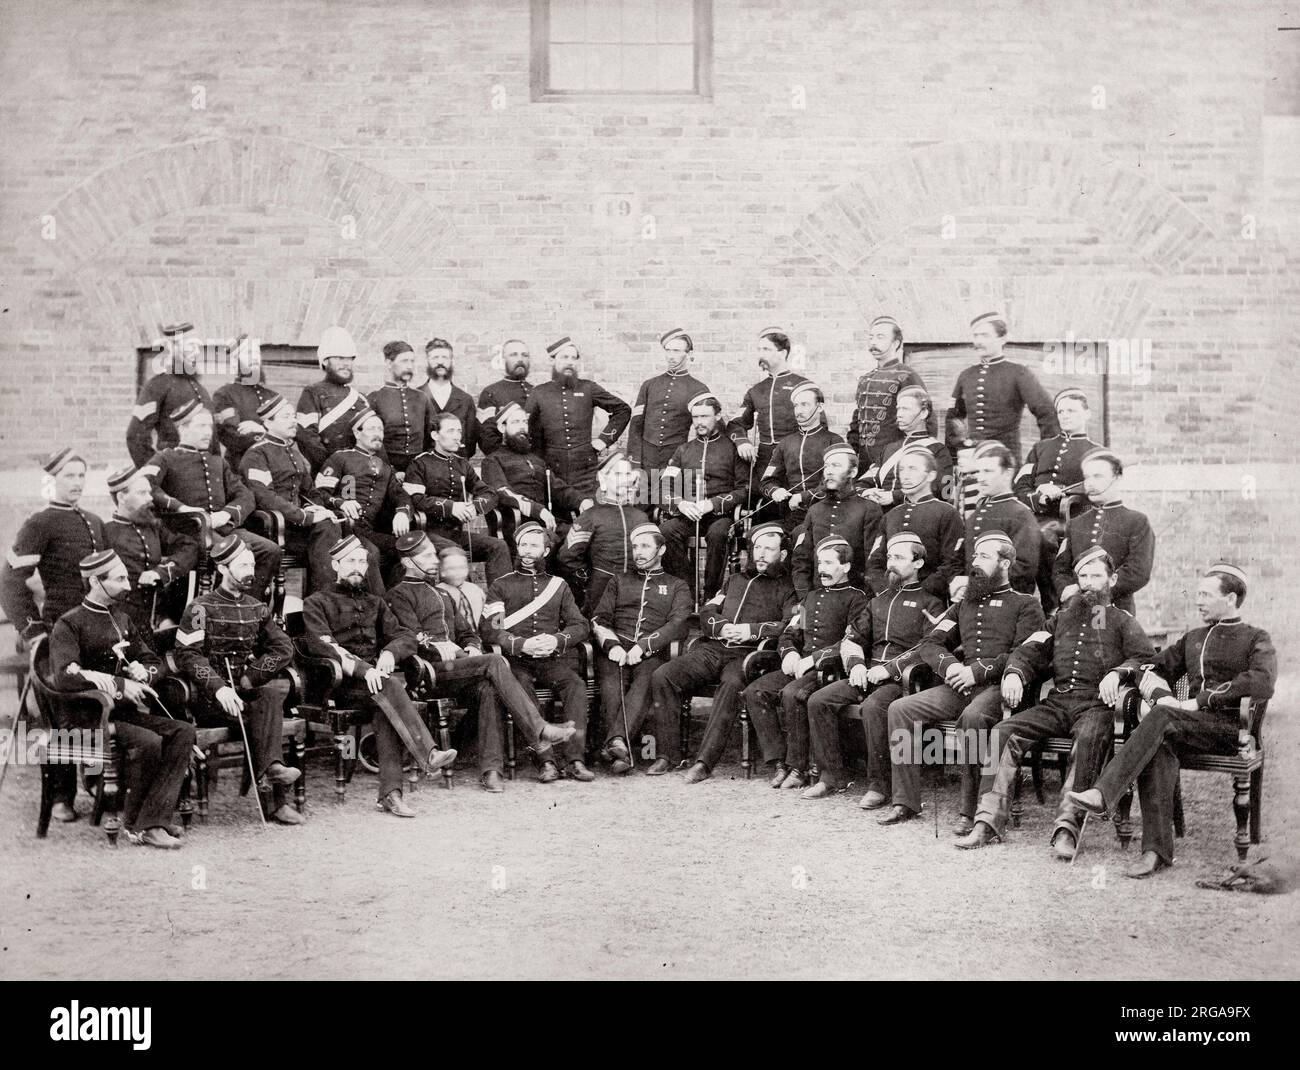 Vintage 19th century photograph - British army in India - officers of the 4th Hussars, 1869 Stock Photo